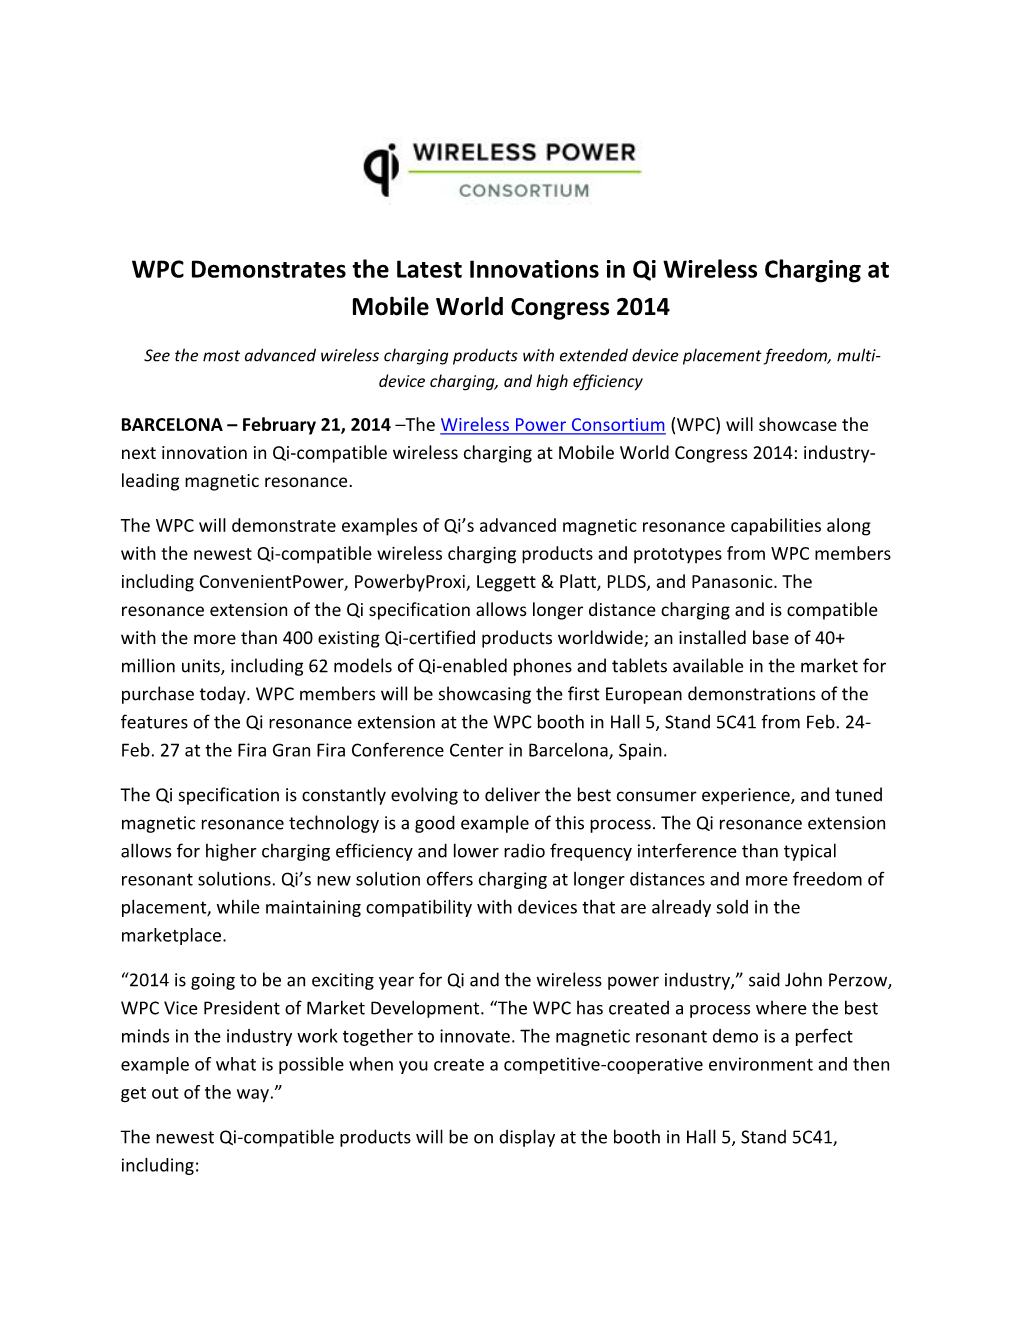 WPC Demonstrates the Latest Innovations in Qi Wireless Charging at Mobile World Congress 2014